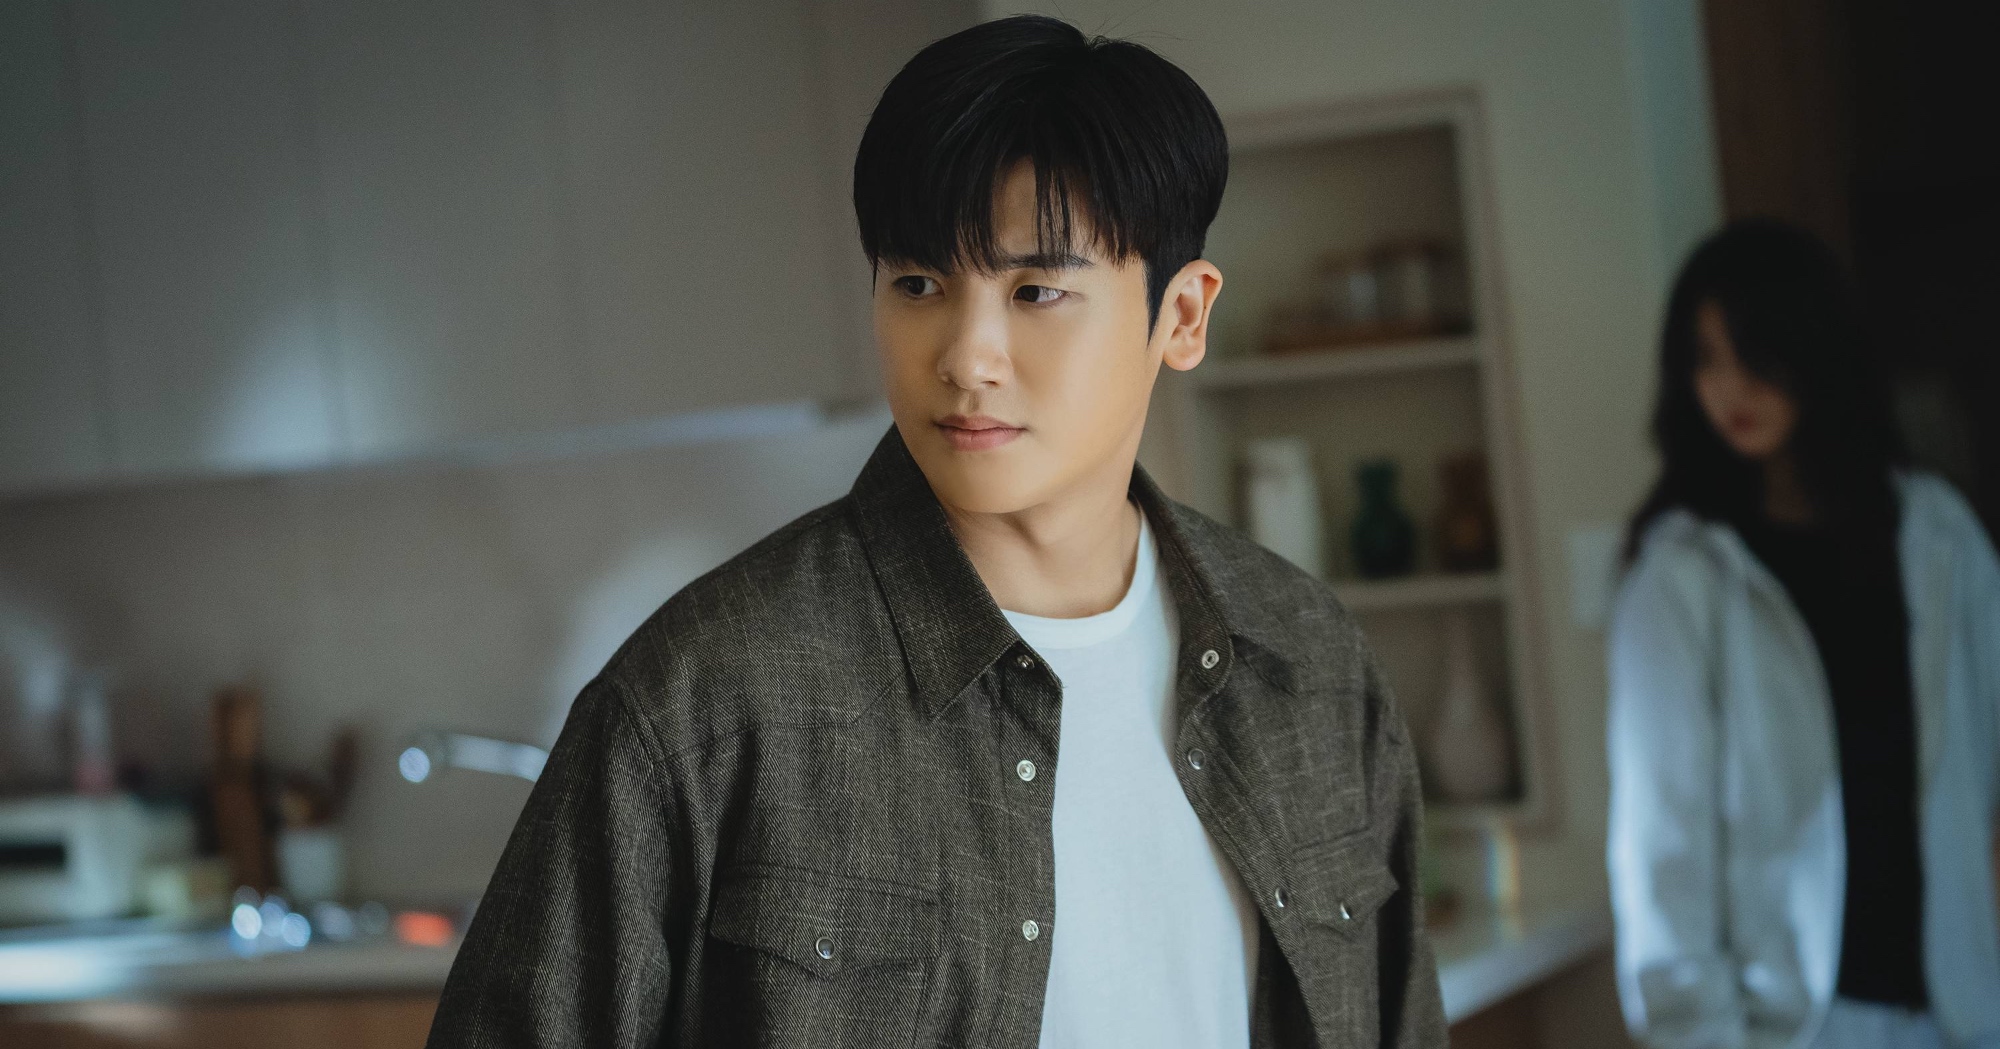 Park Hyung-sik in 'Happiness' K-drama wearing grey shirt and green button-up.